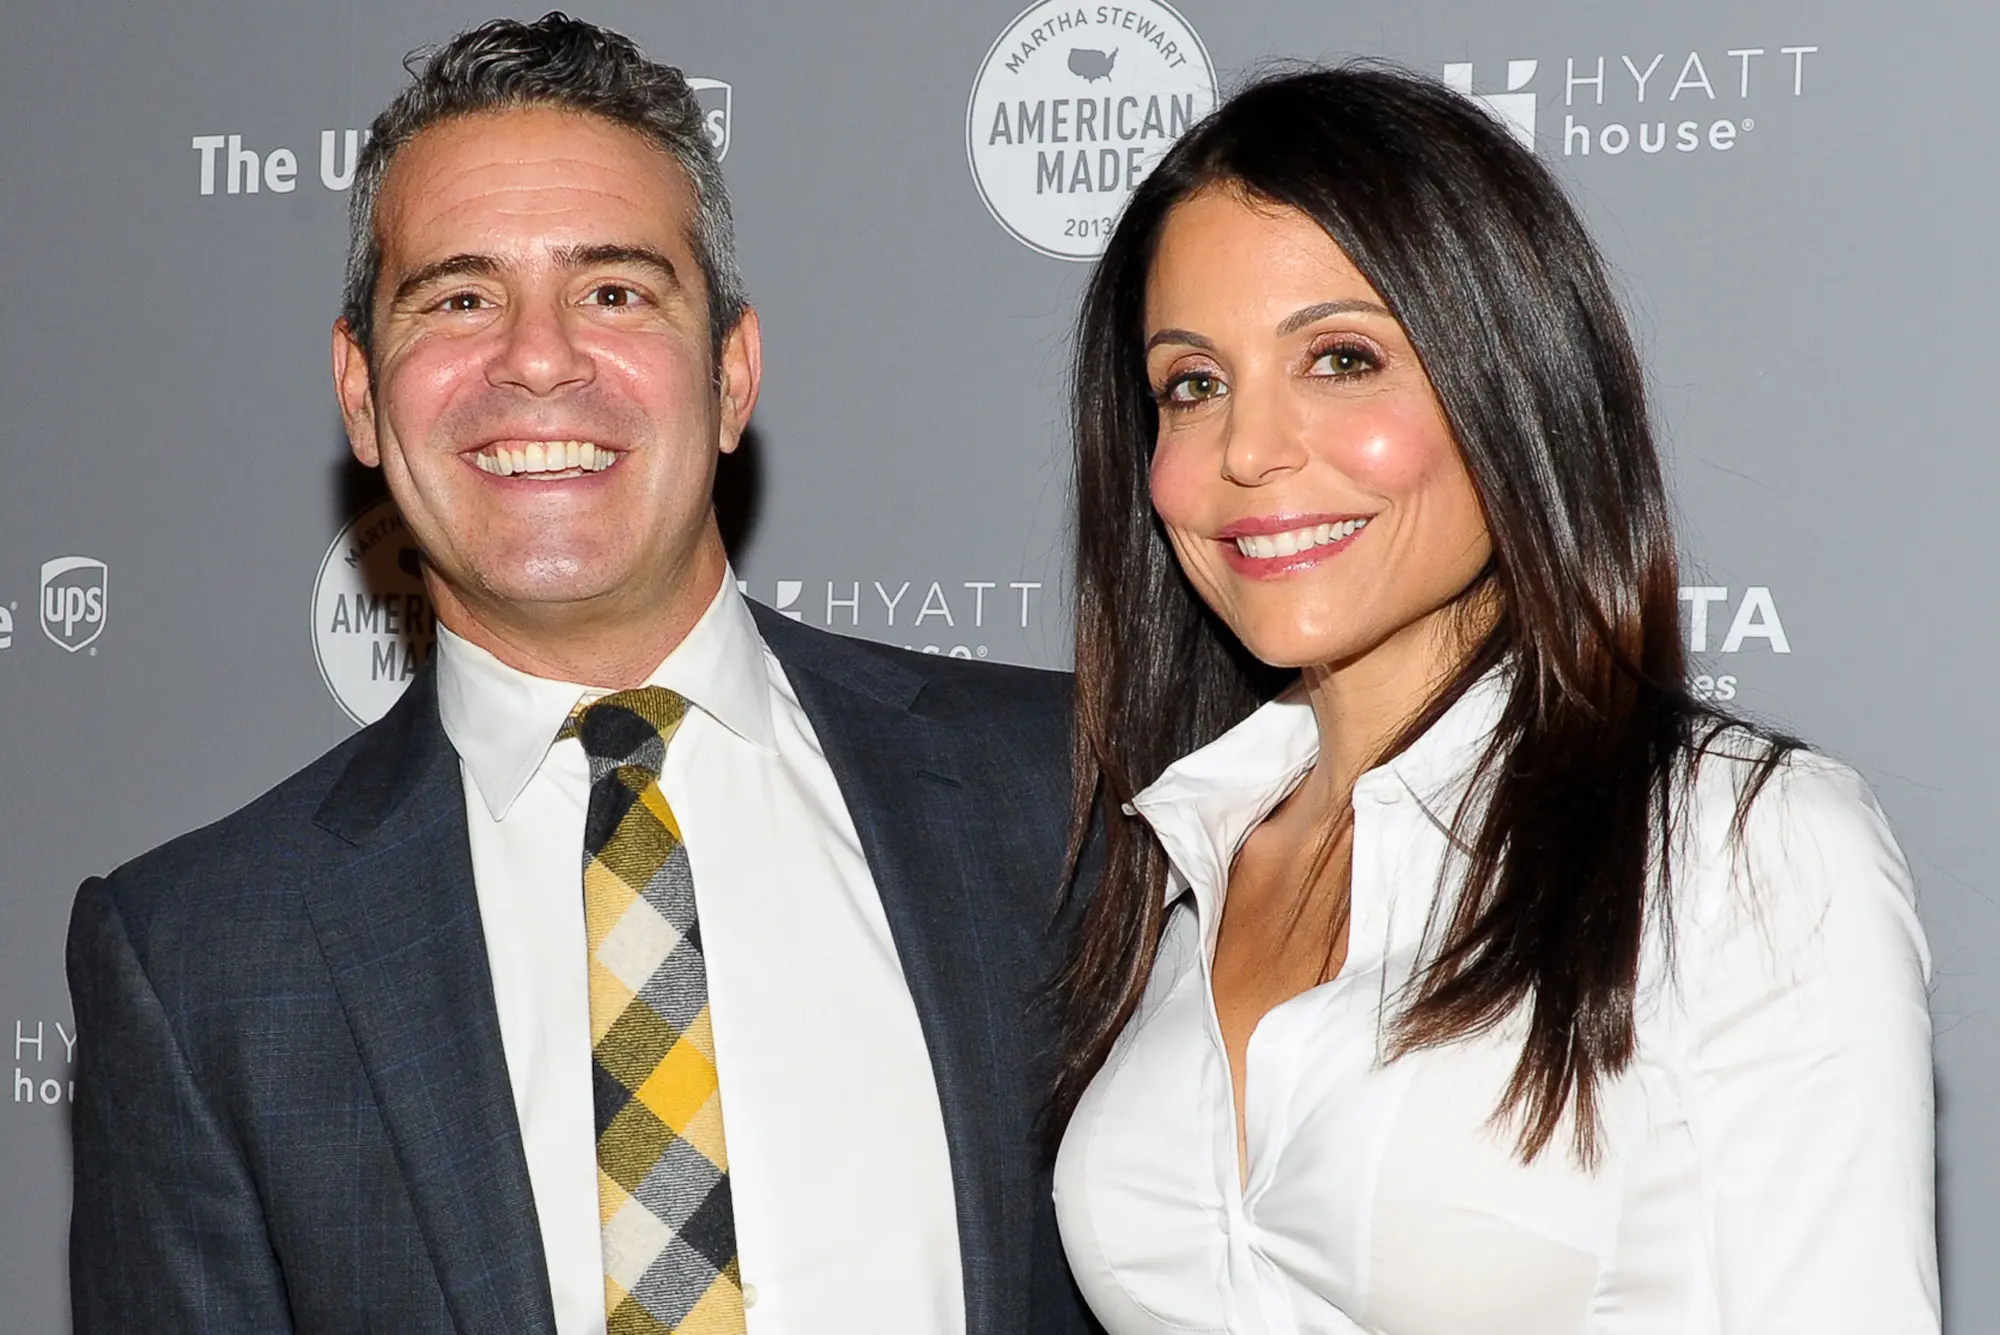 Bethenny Frankel and Andy Cohen Remain Close Friends Despite Her Trashing ‘Housewives’